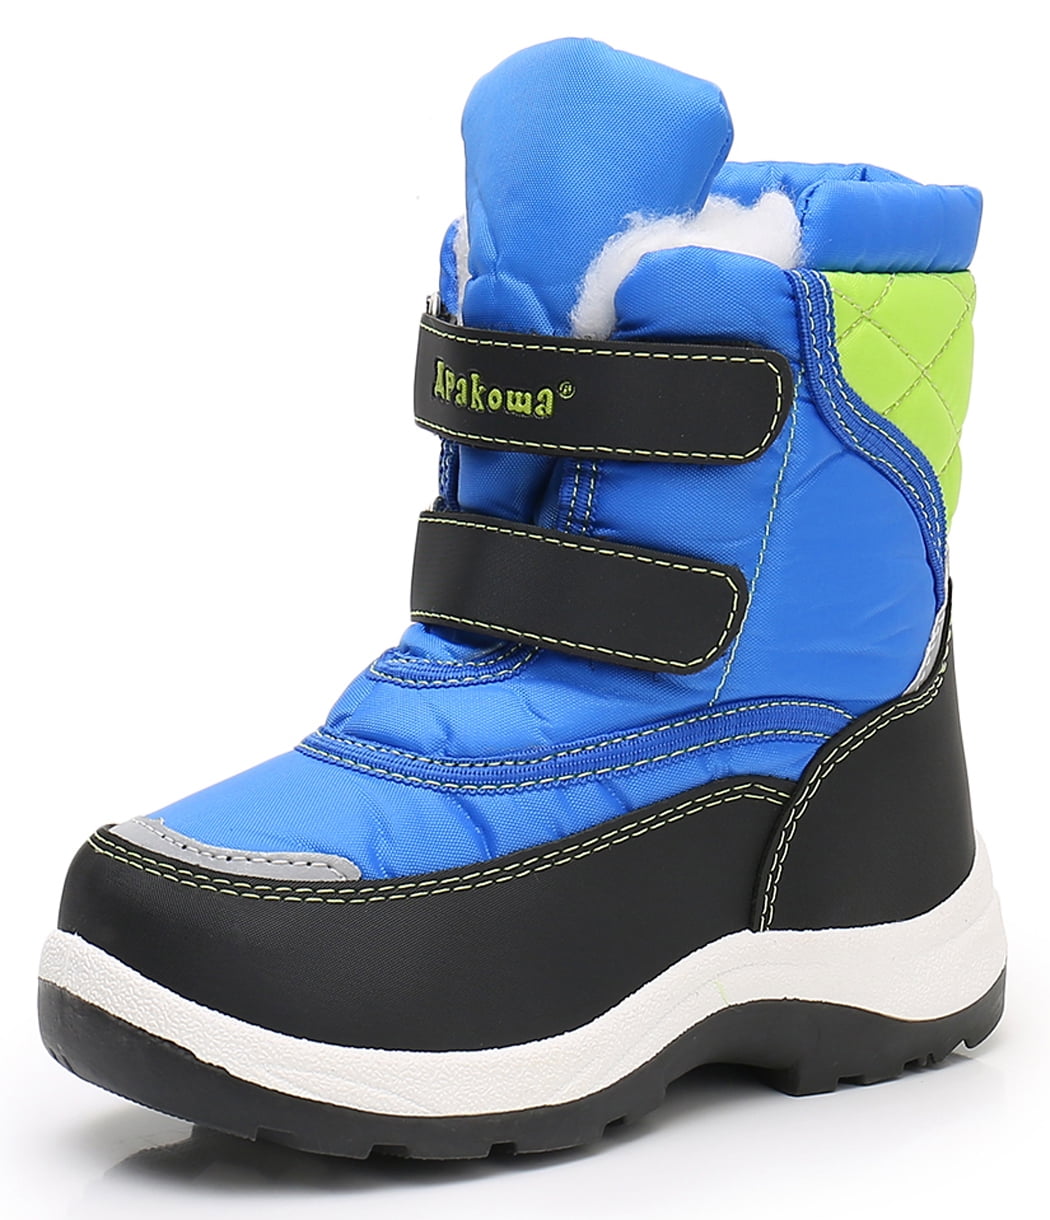 Apakowa Toddler Boys Boots High Top Sneakers